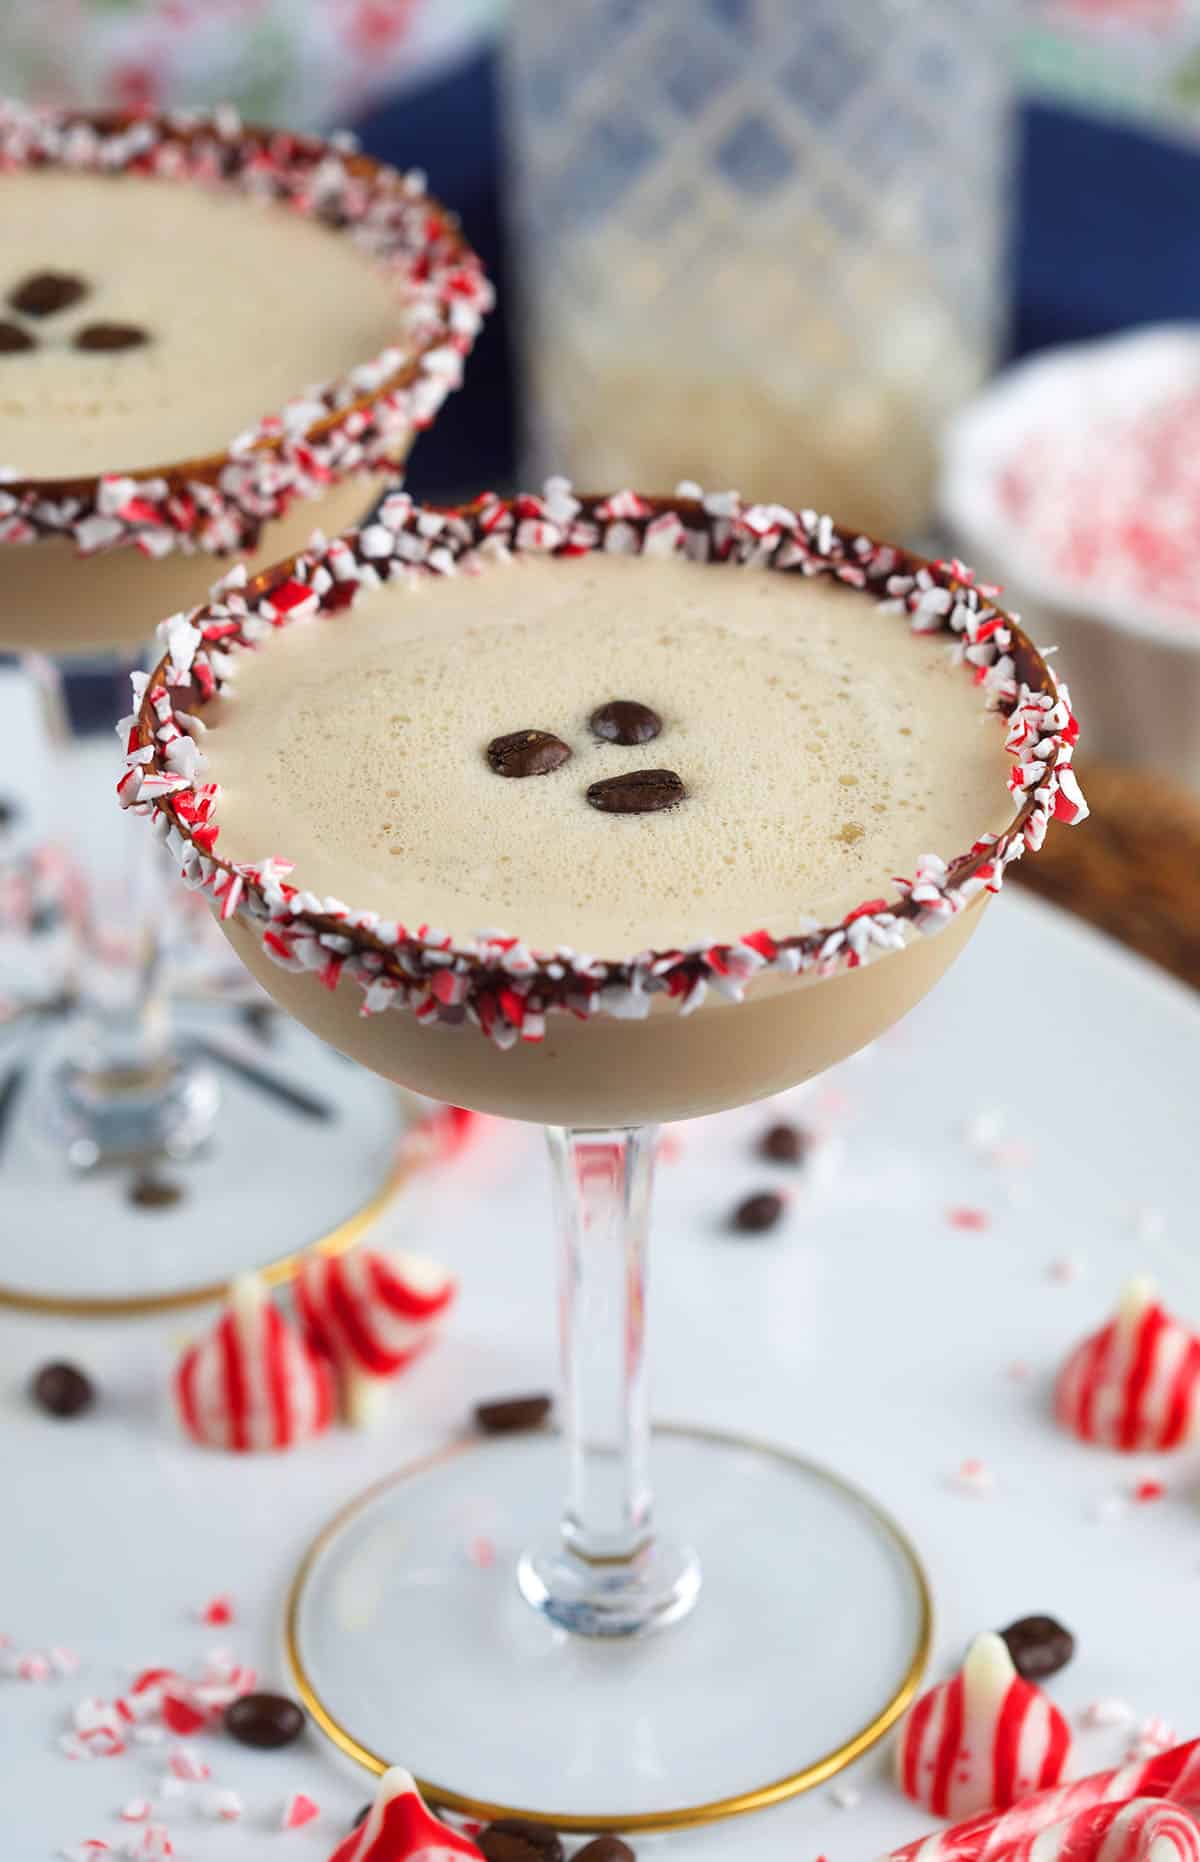 A peppermint martini is garnished with espresso beans.